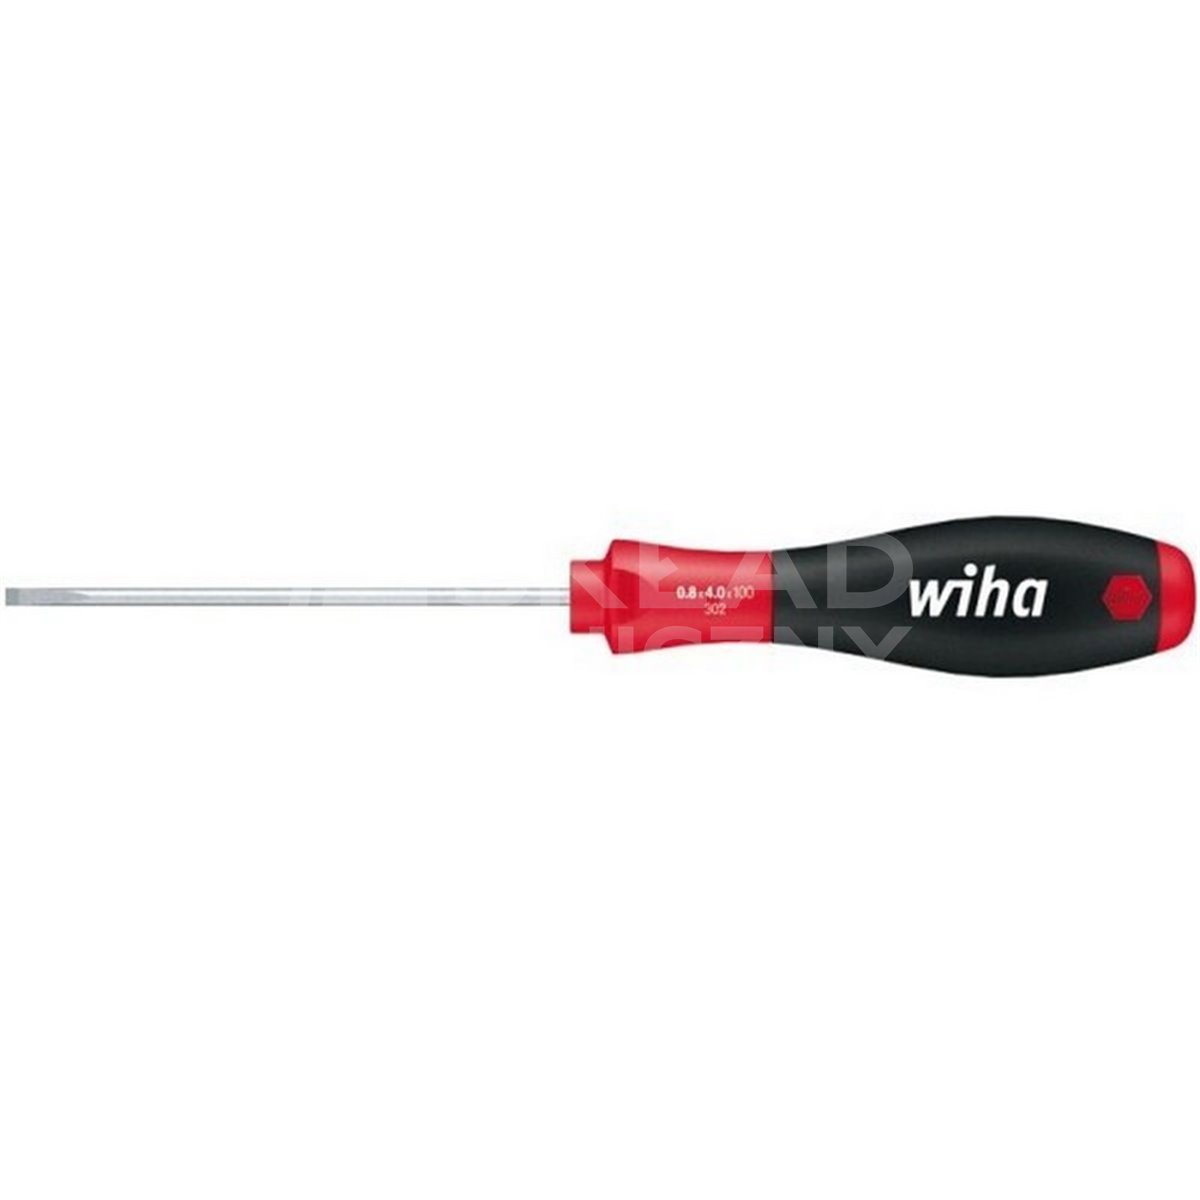 SoftFinish 302 4.5 80mm Flathead Screwdriver for Electricians by Wiha 27753.